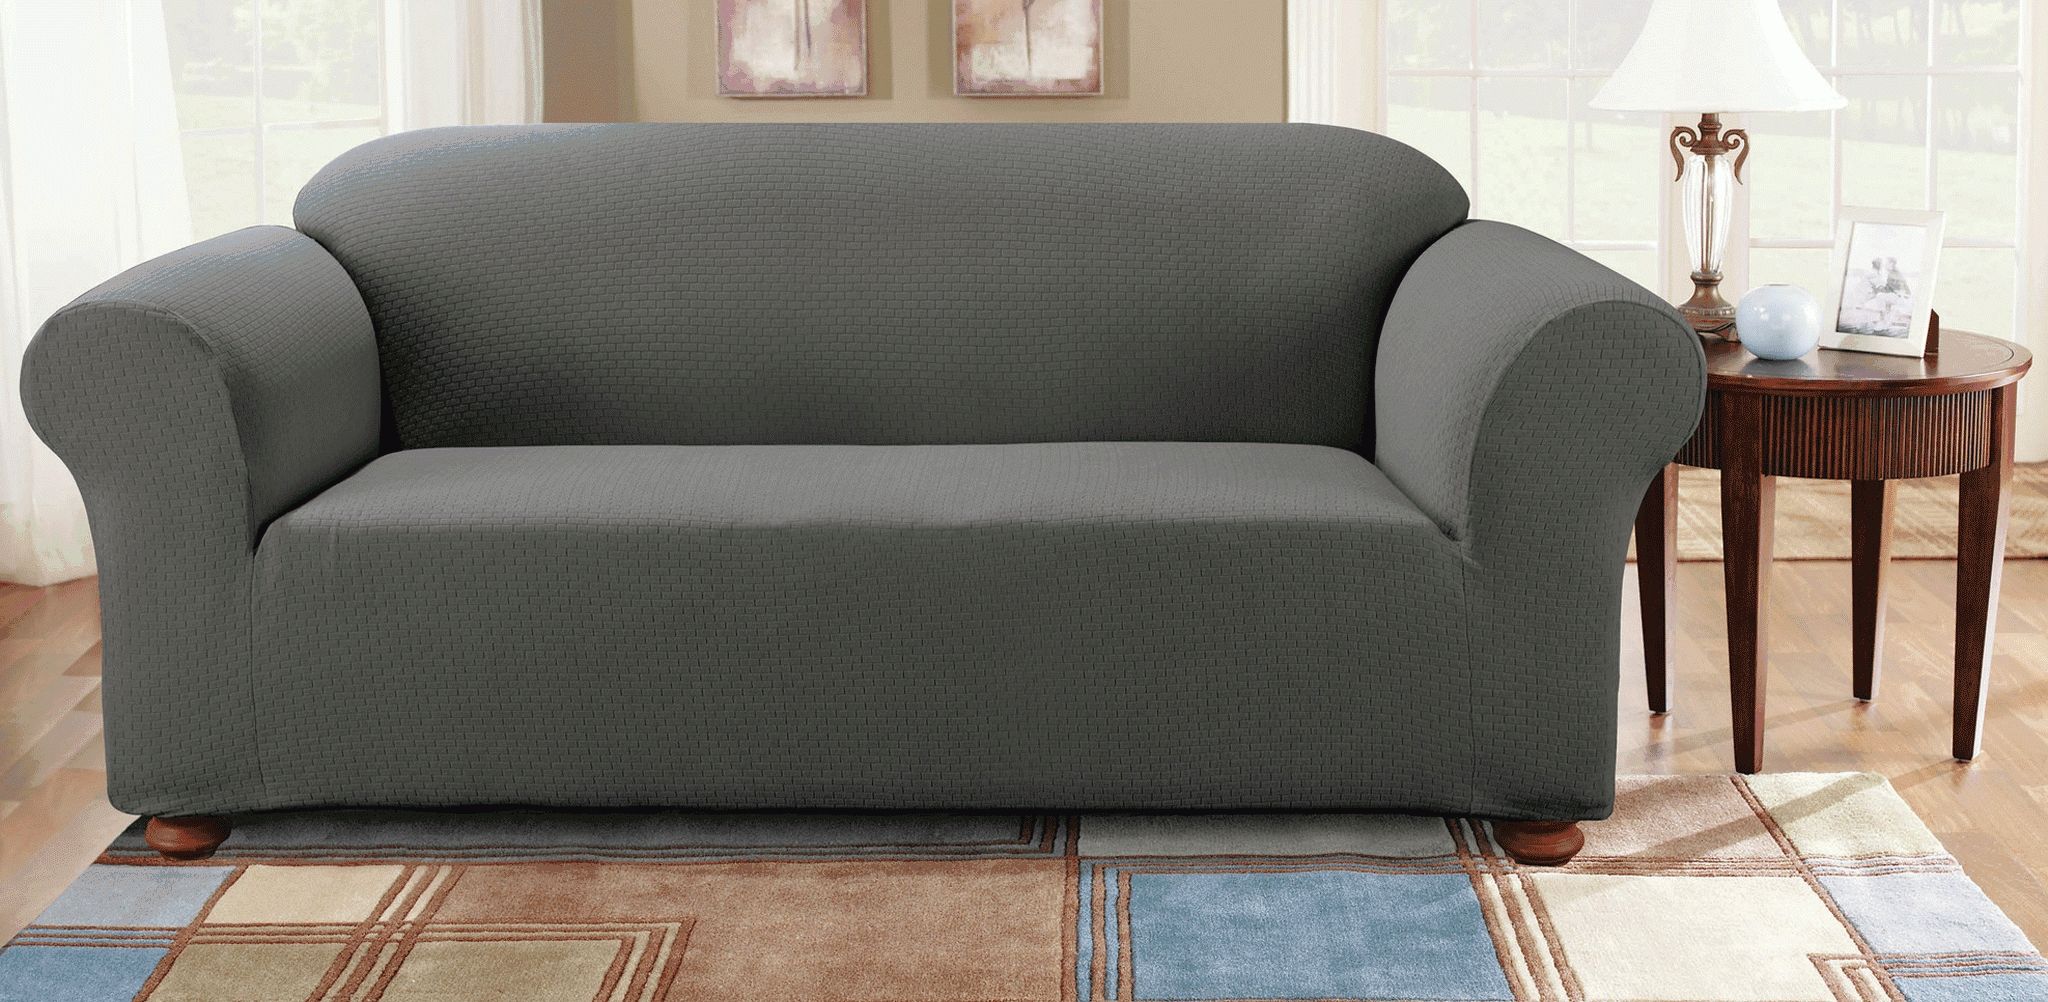 Furniture: Couch Covers At Walmart To Make Your Furniture Stylish With Covers For Sofas (View 7 of 20)